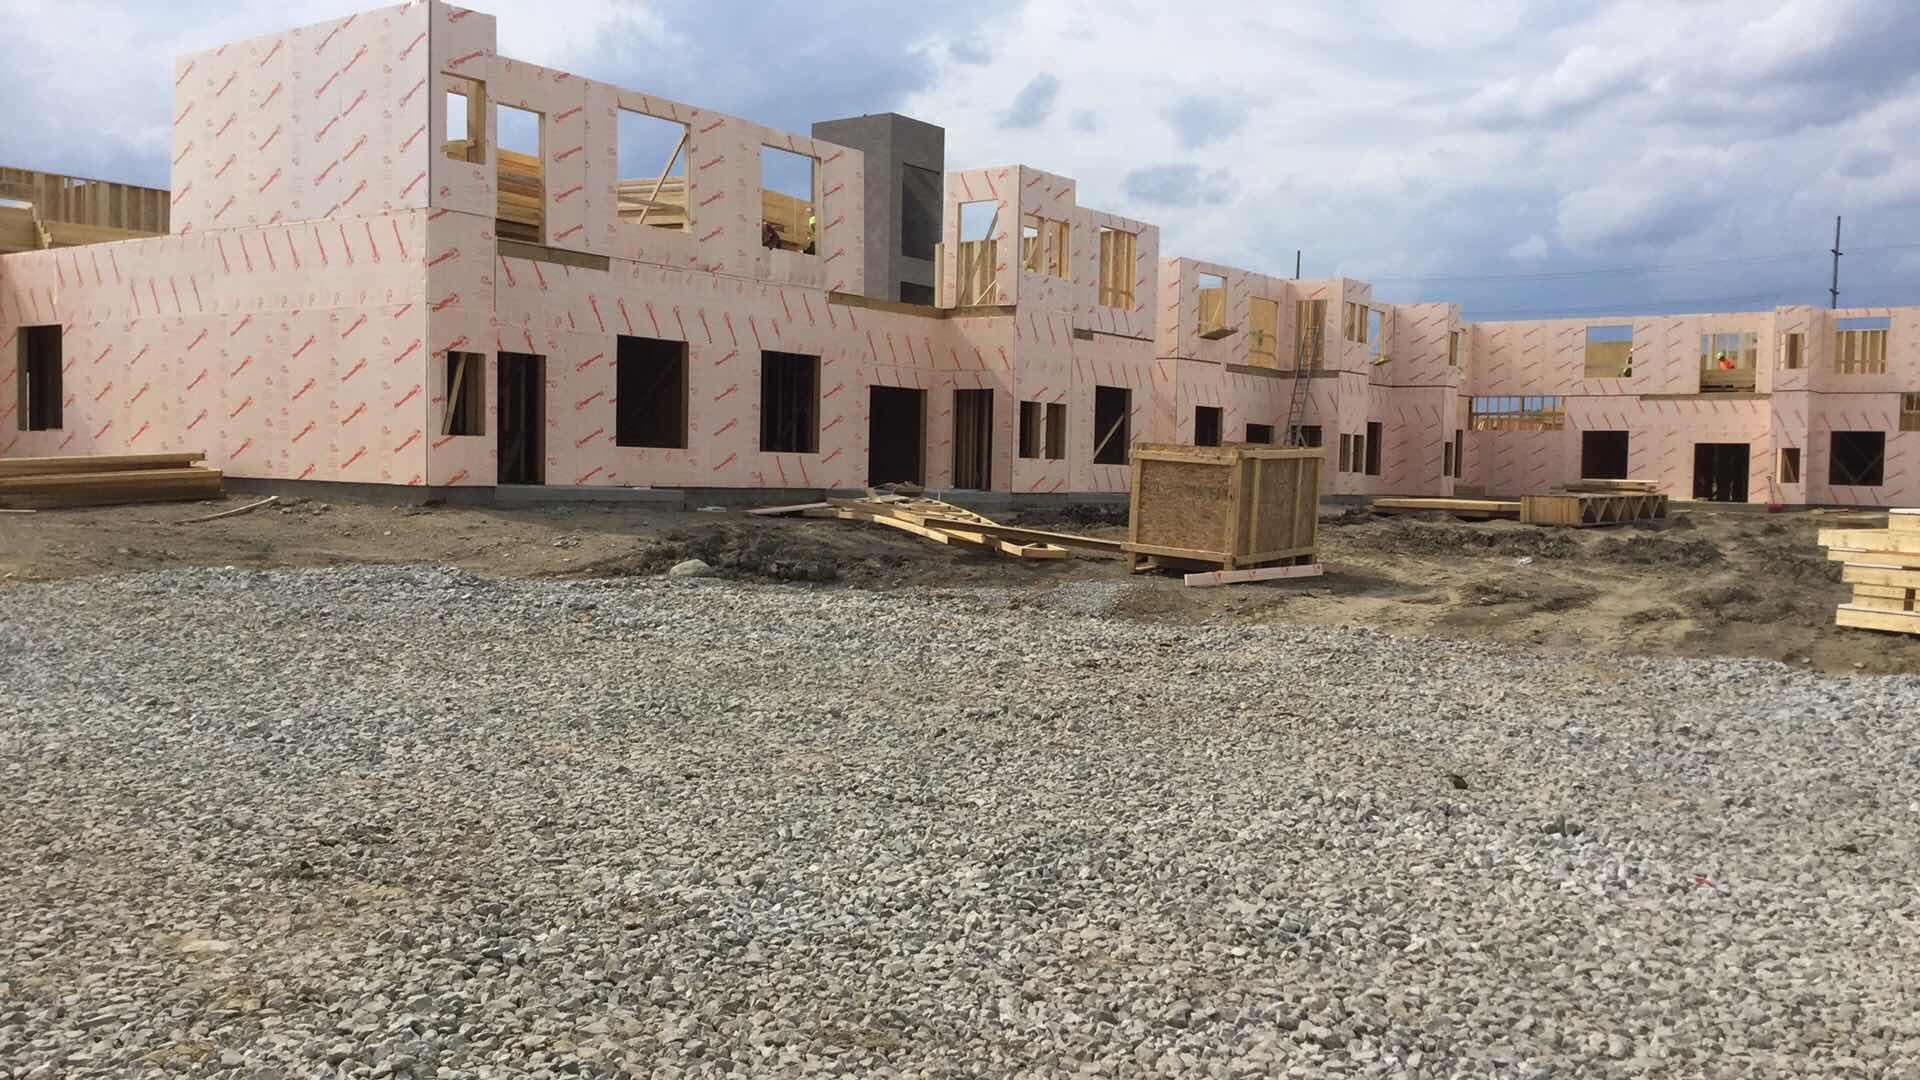 StoryPoint Grove City Construction Update as of 6/3/16